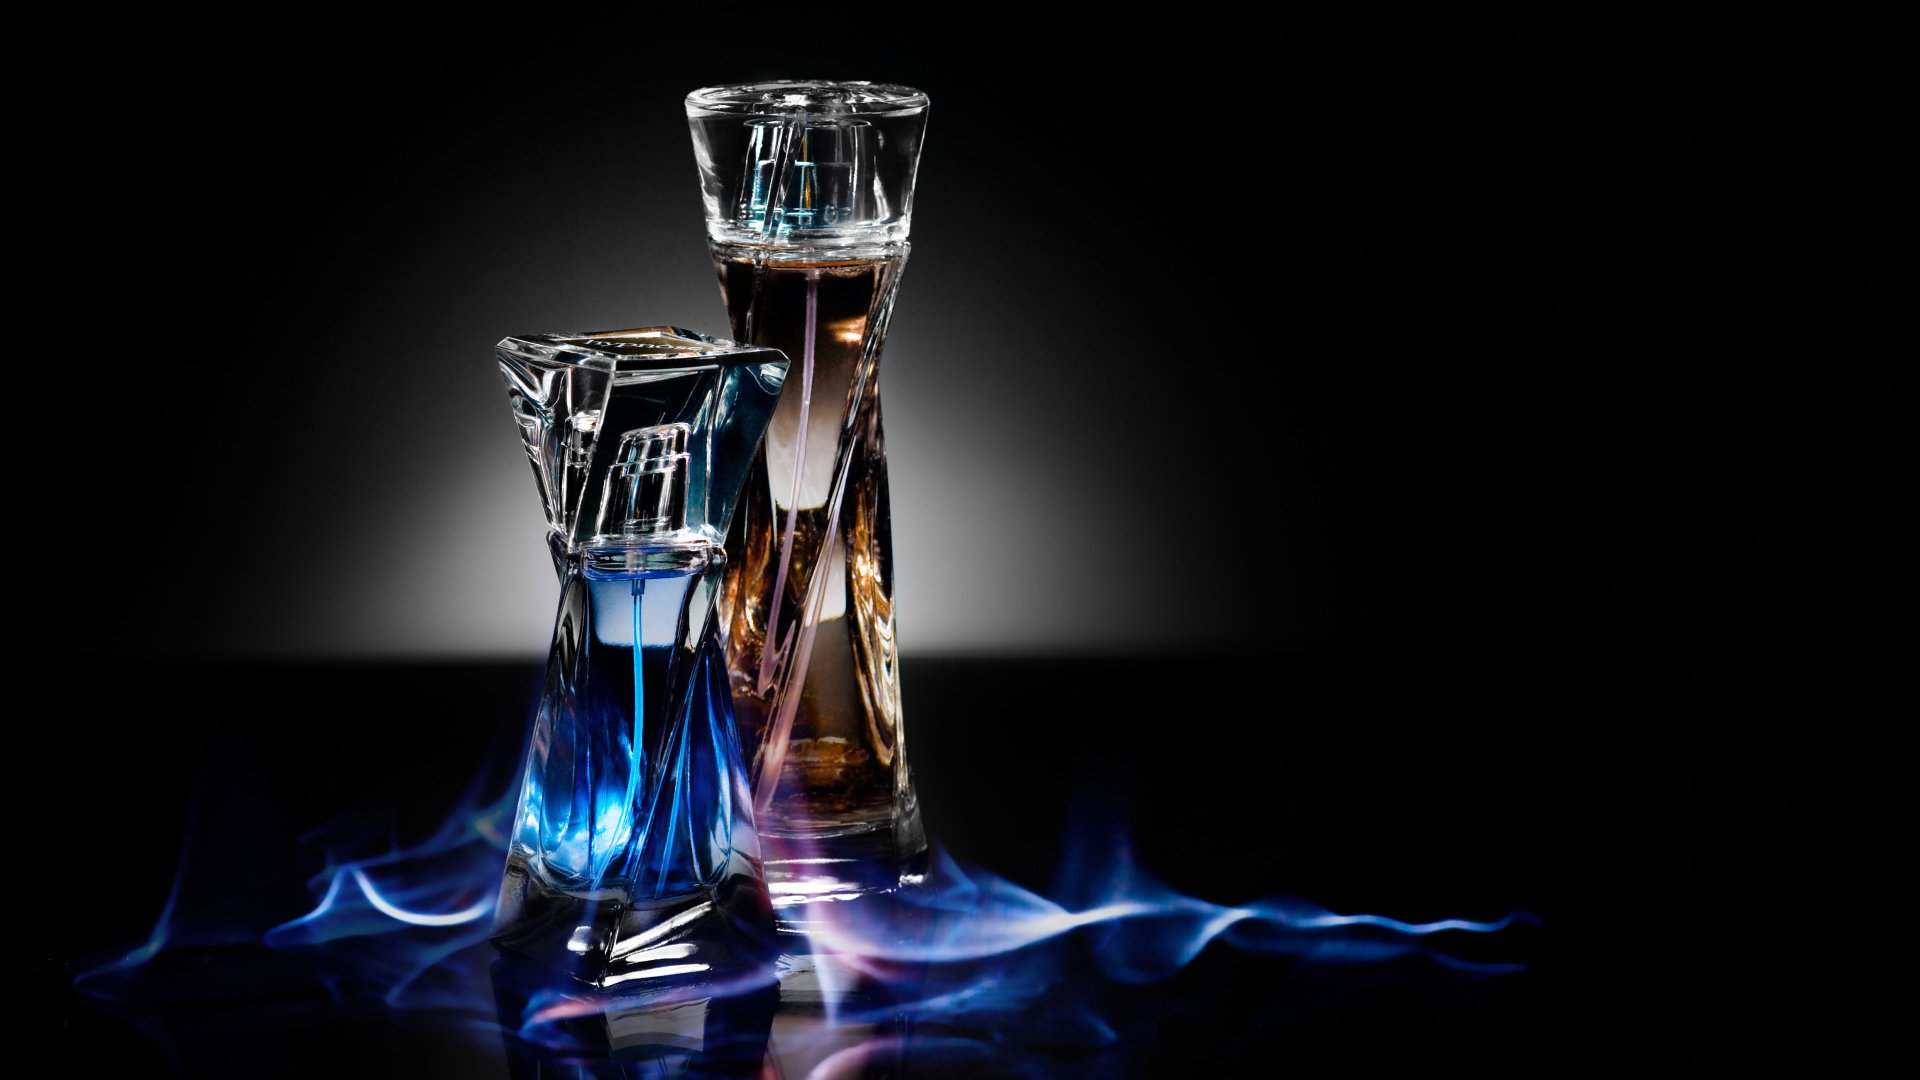 19 Perfume Hd Wallpapers Background Images Wallpaper Abyss